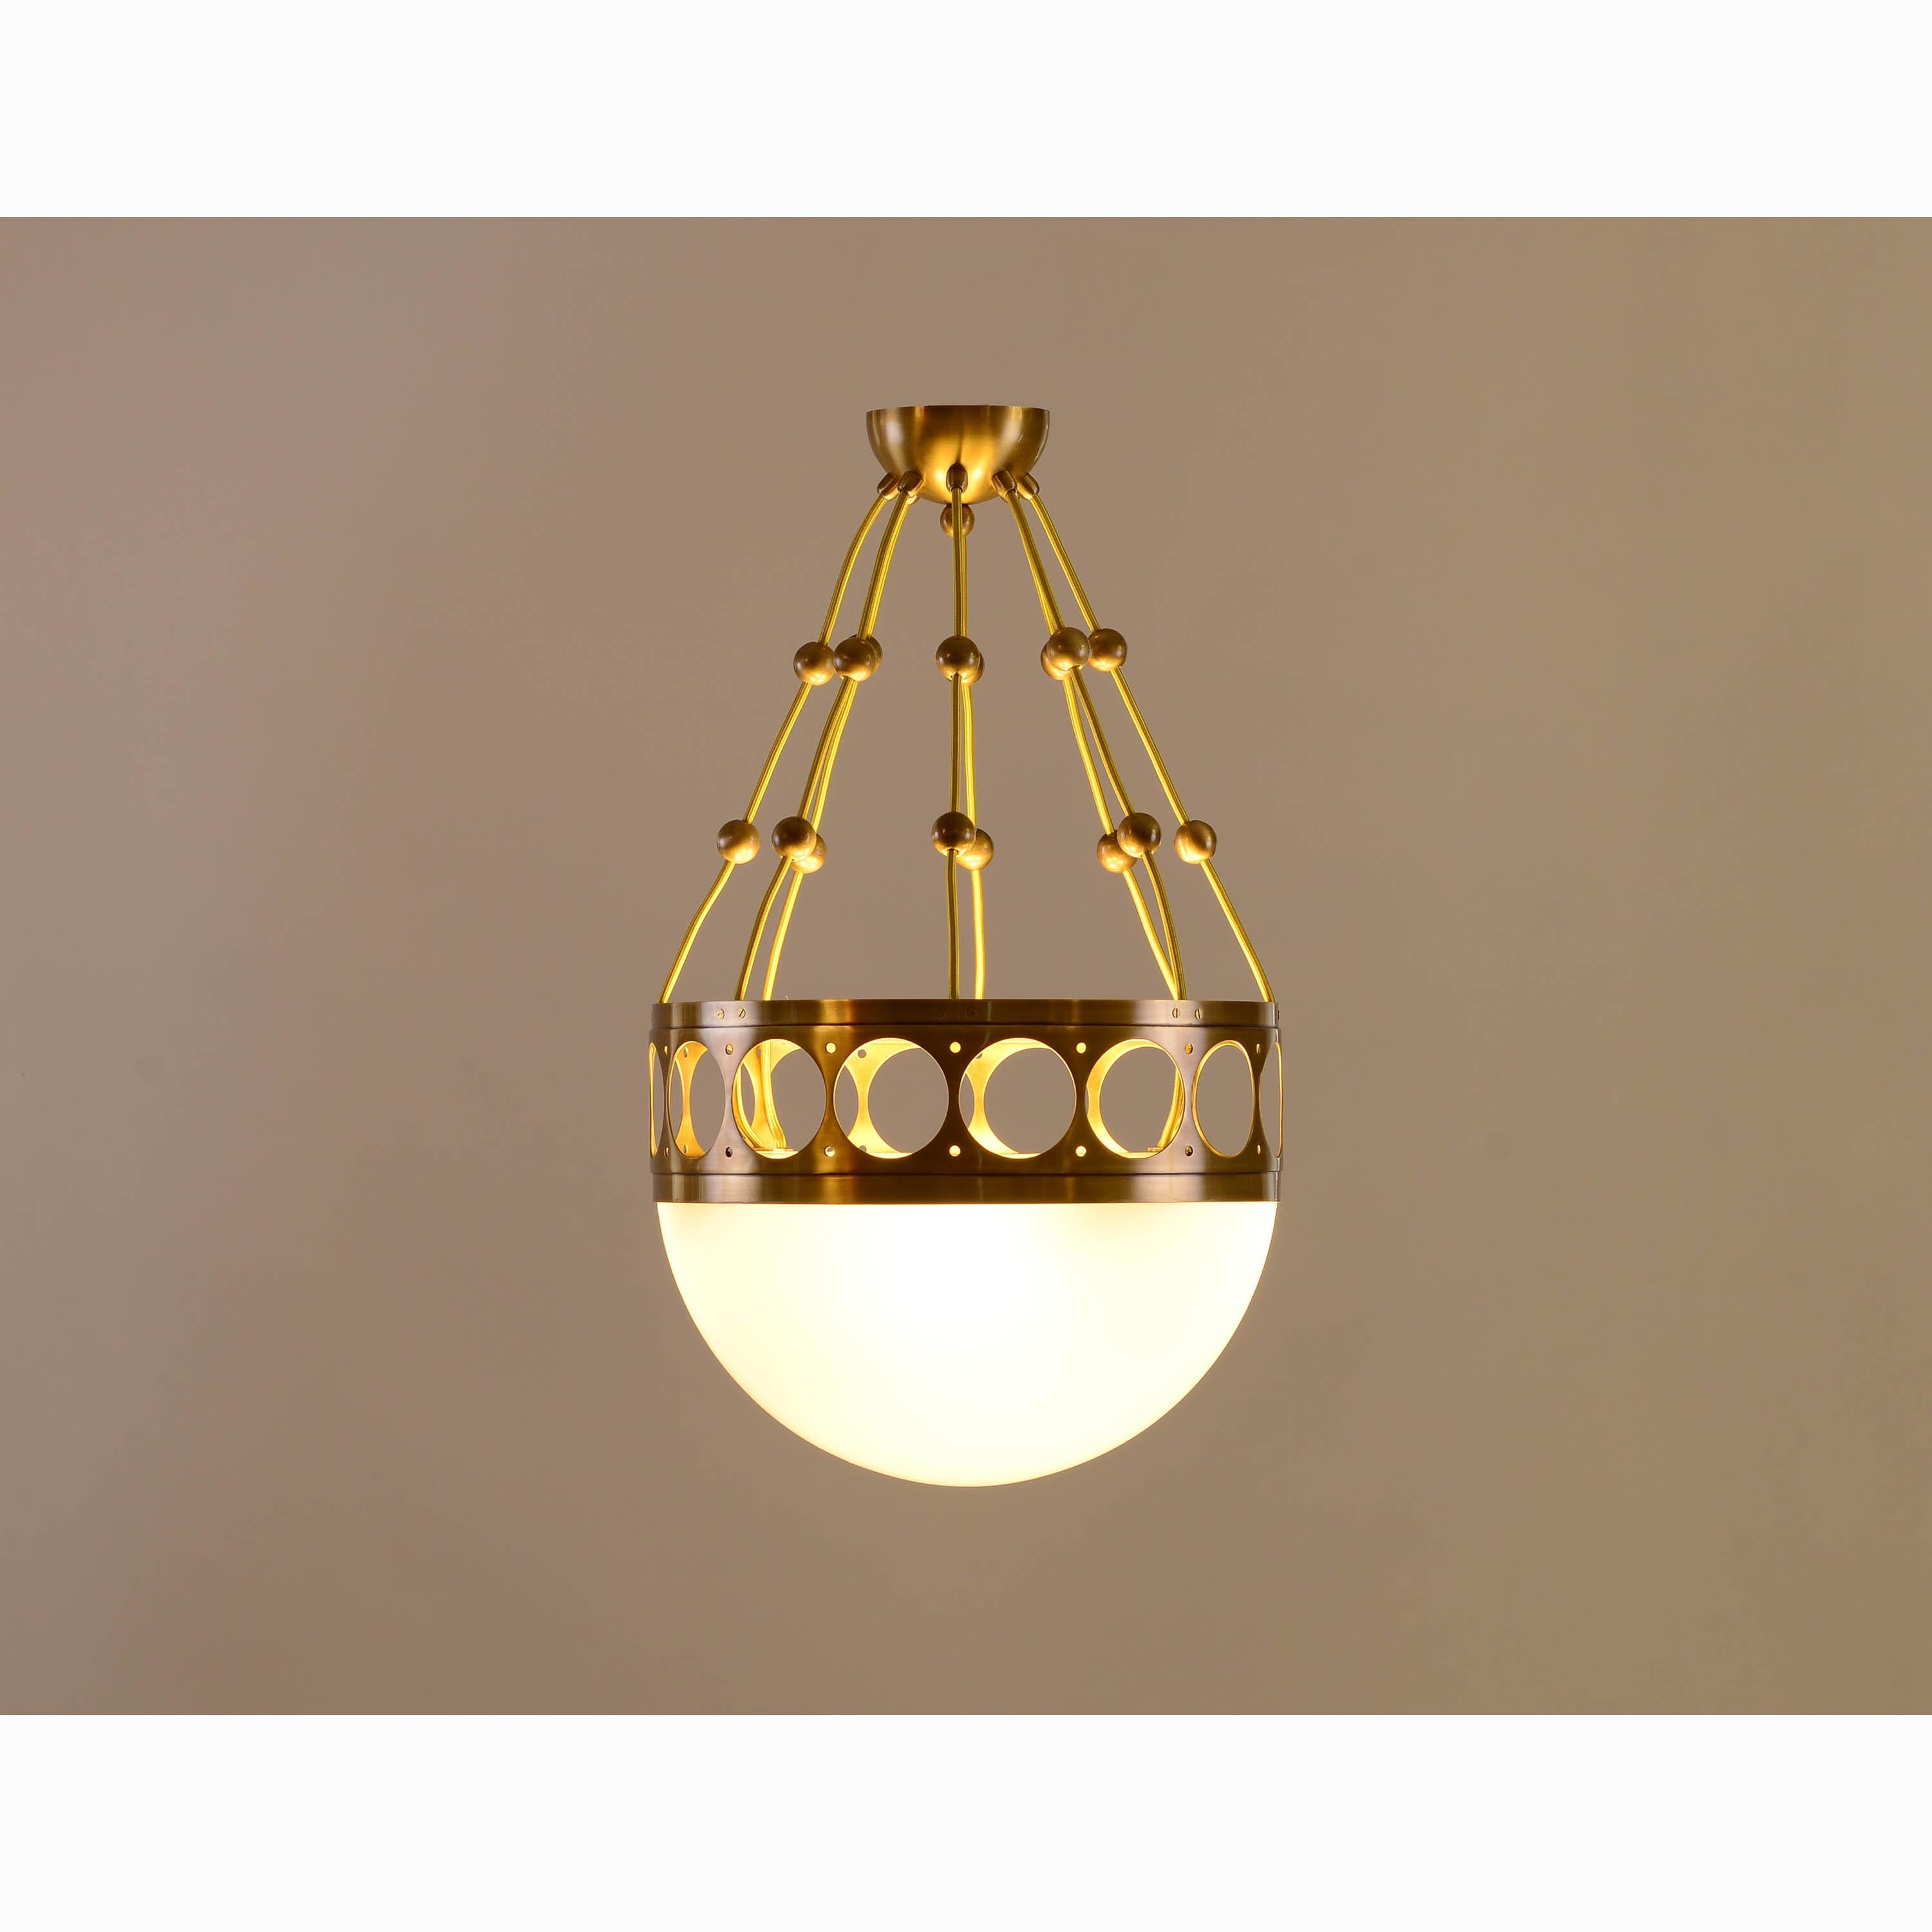 Beautiful Woka ceiling lamp, also available with a 50 cm diameter radius - total drop is custom-made. 
Materials used are brass and opaline glass. Available in different finishes. 
Length: custom-made 

All components according to the UL